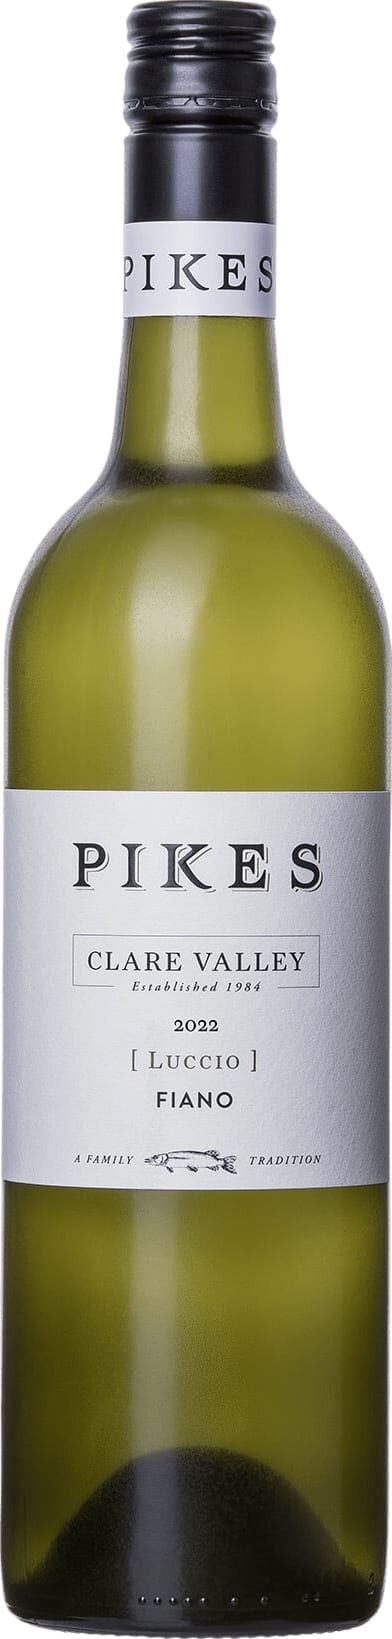 Pikes Luccio Fiano 2023 75cl - Buy Pikes Wines from GREAT WINES DIRECT wine shop